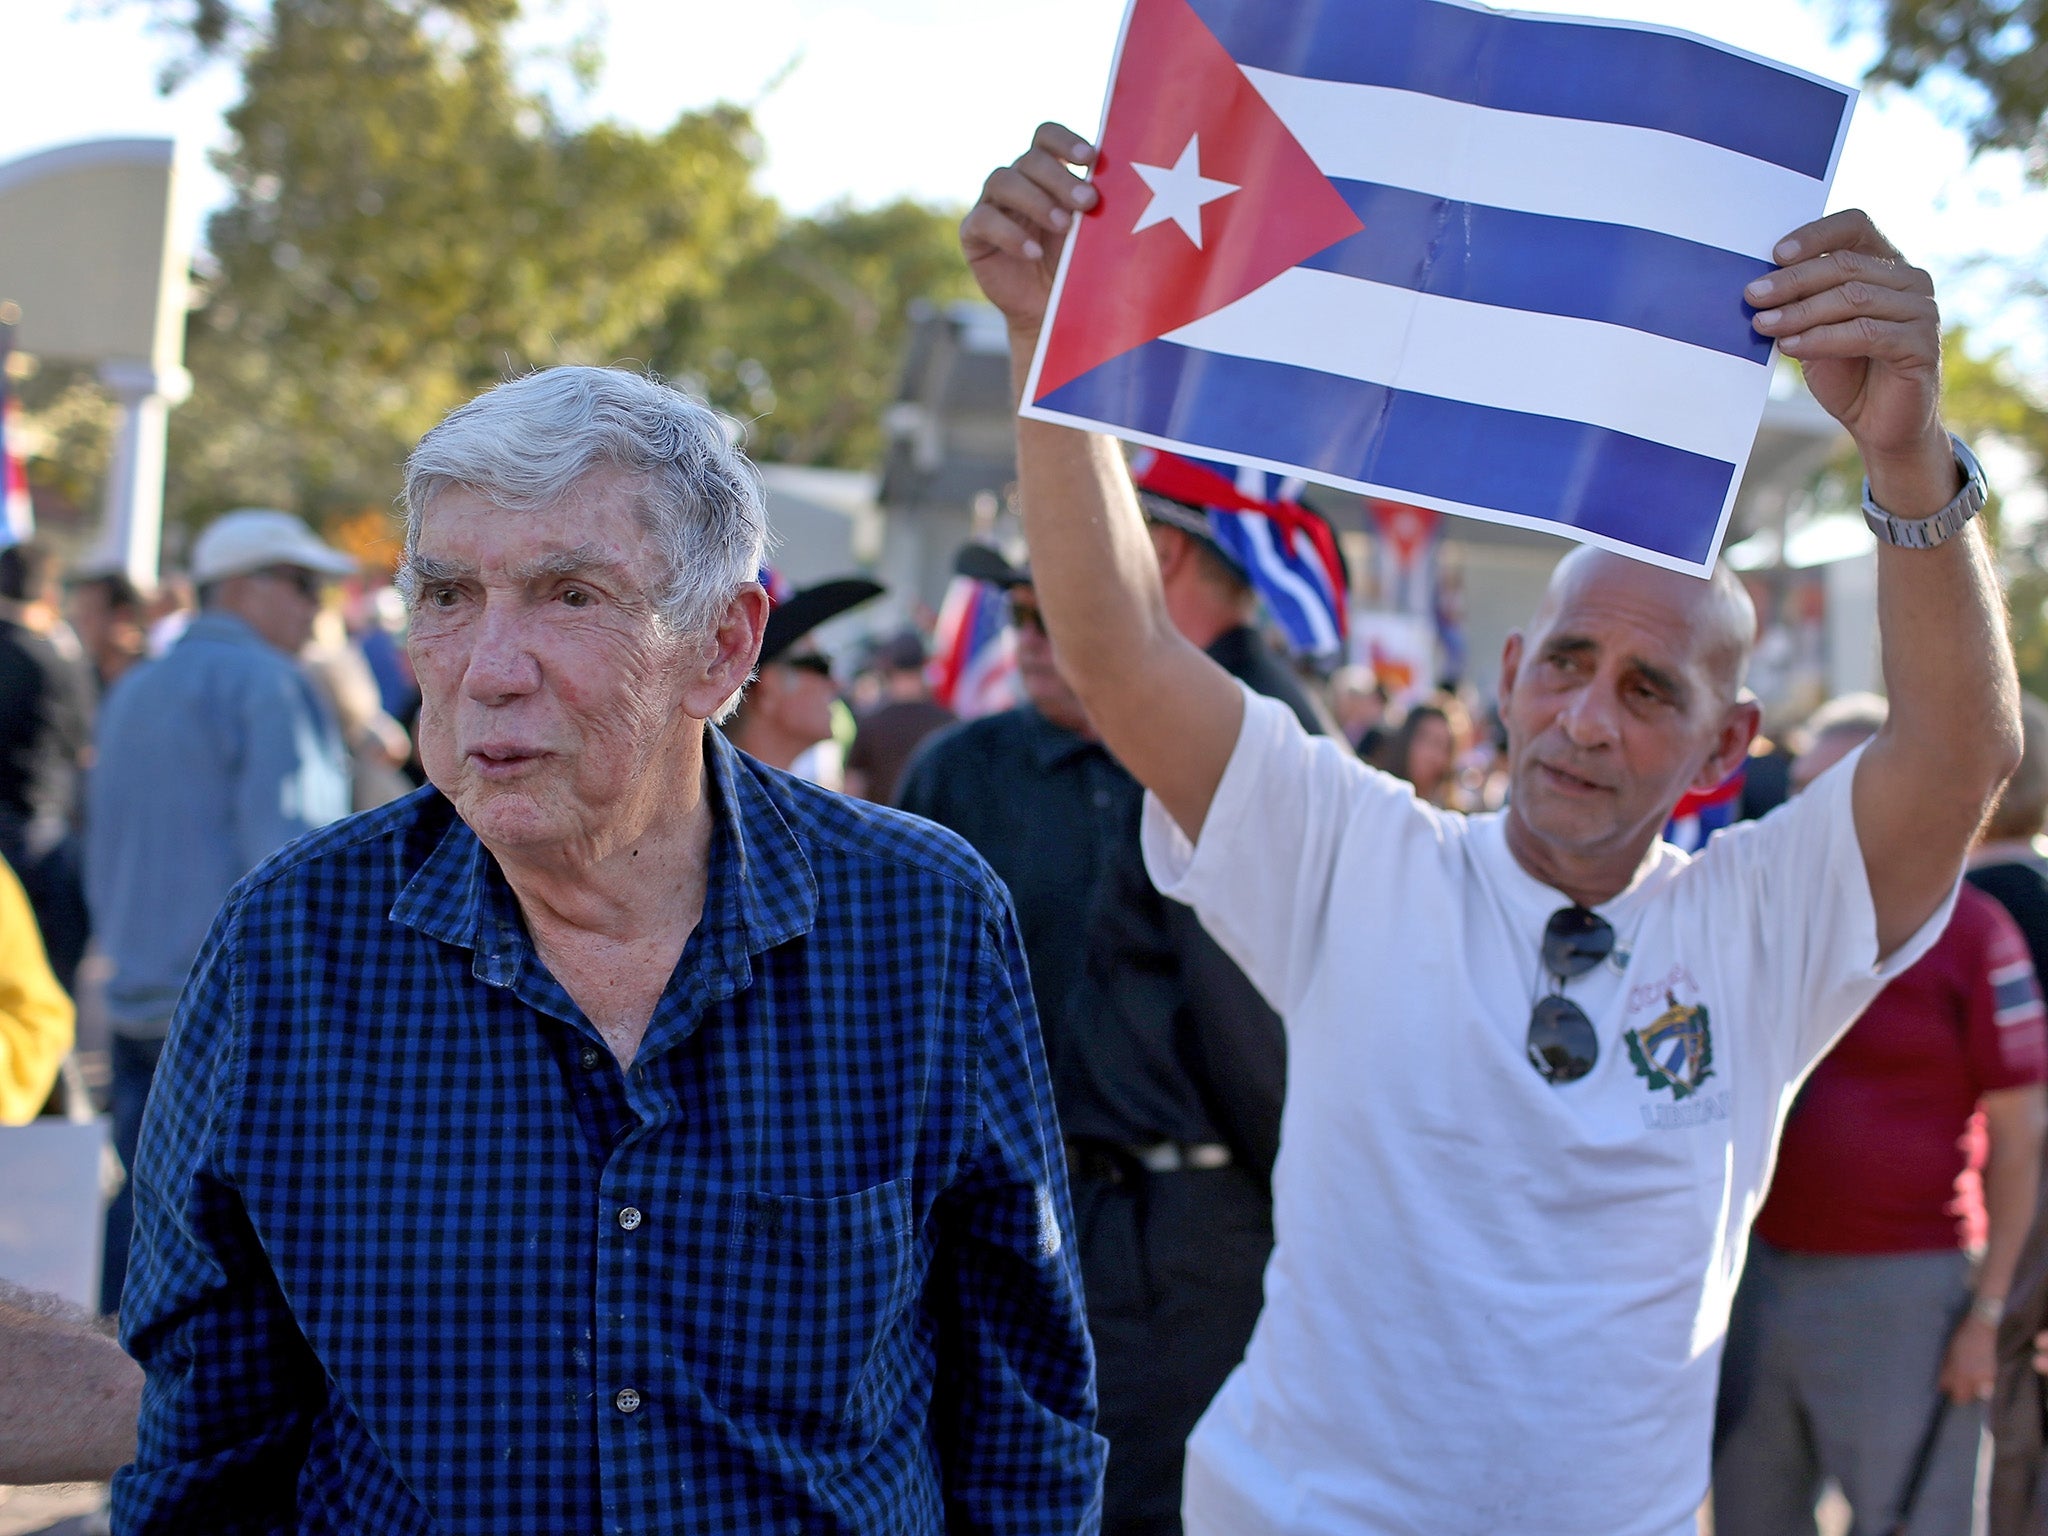 Carriles (left) in 2014 at a Miami protest against the Obama administration’s warming of relations with Cuba